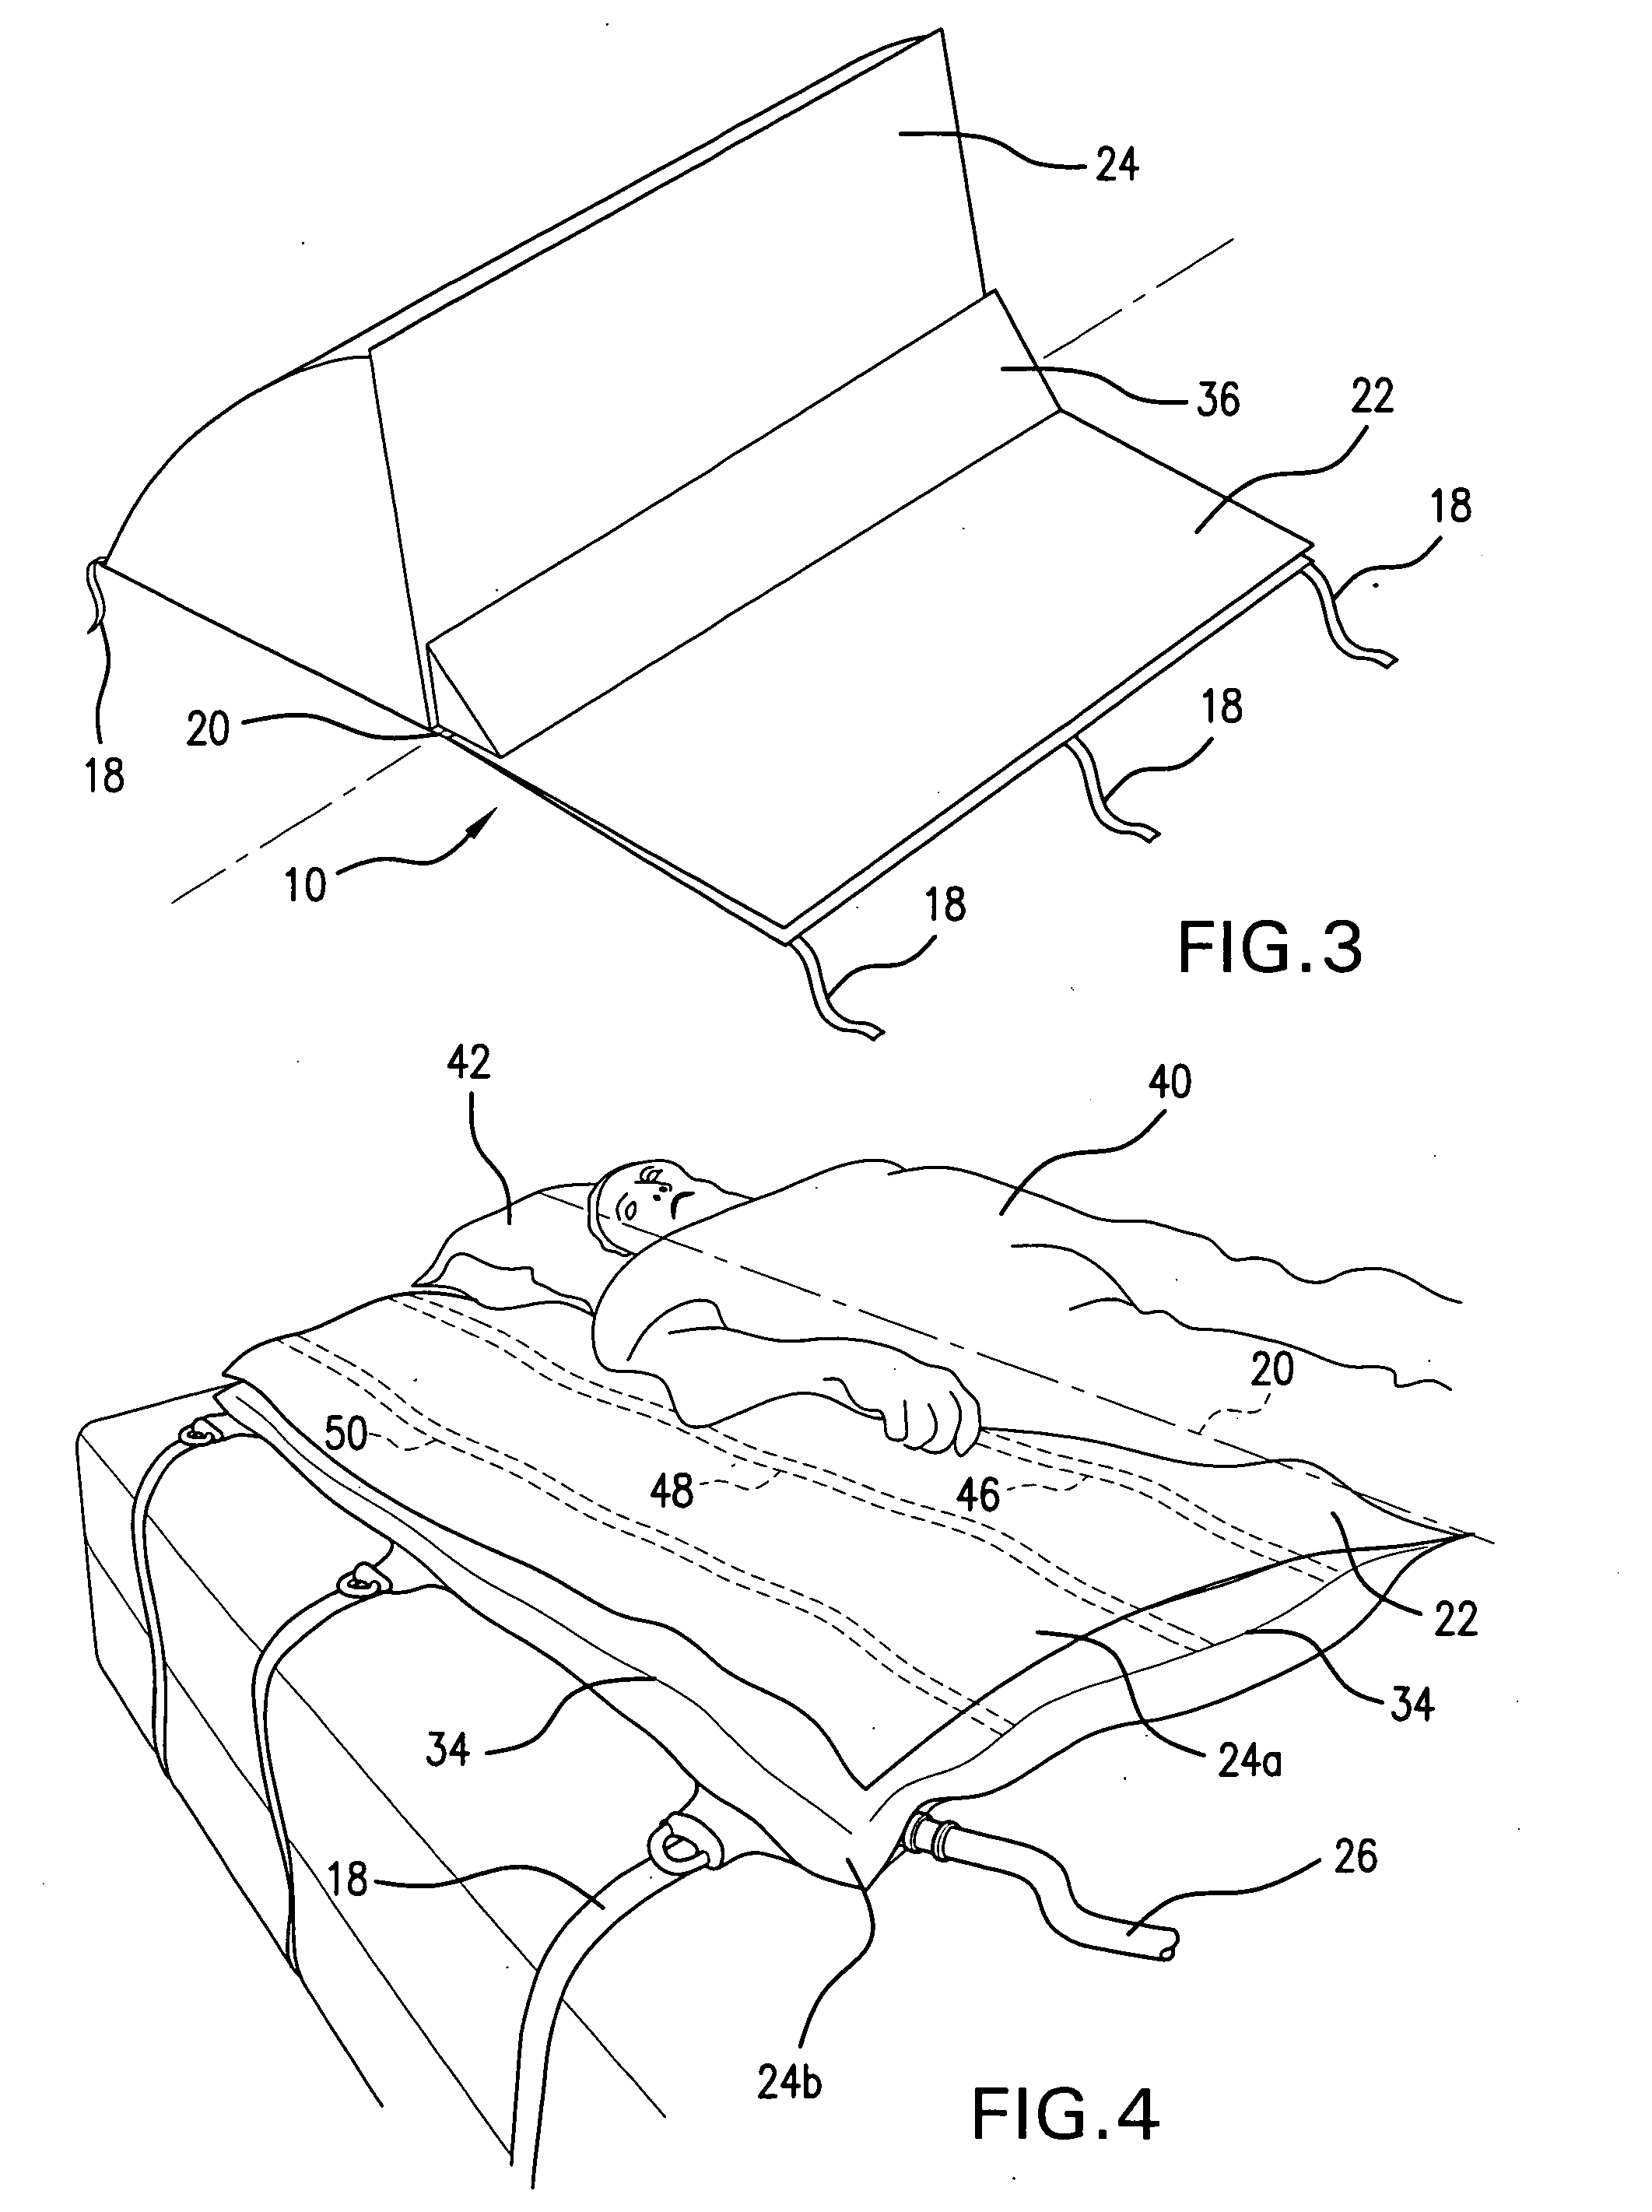 Inflatable air mattress for rotating patients